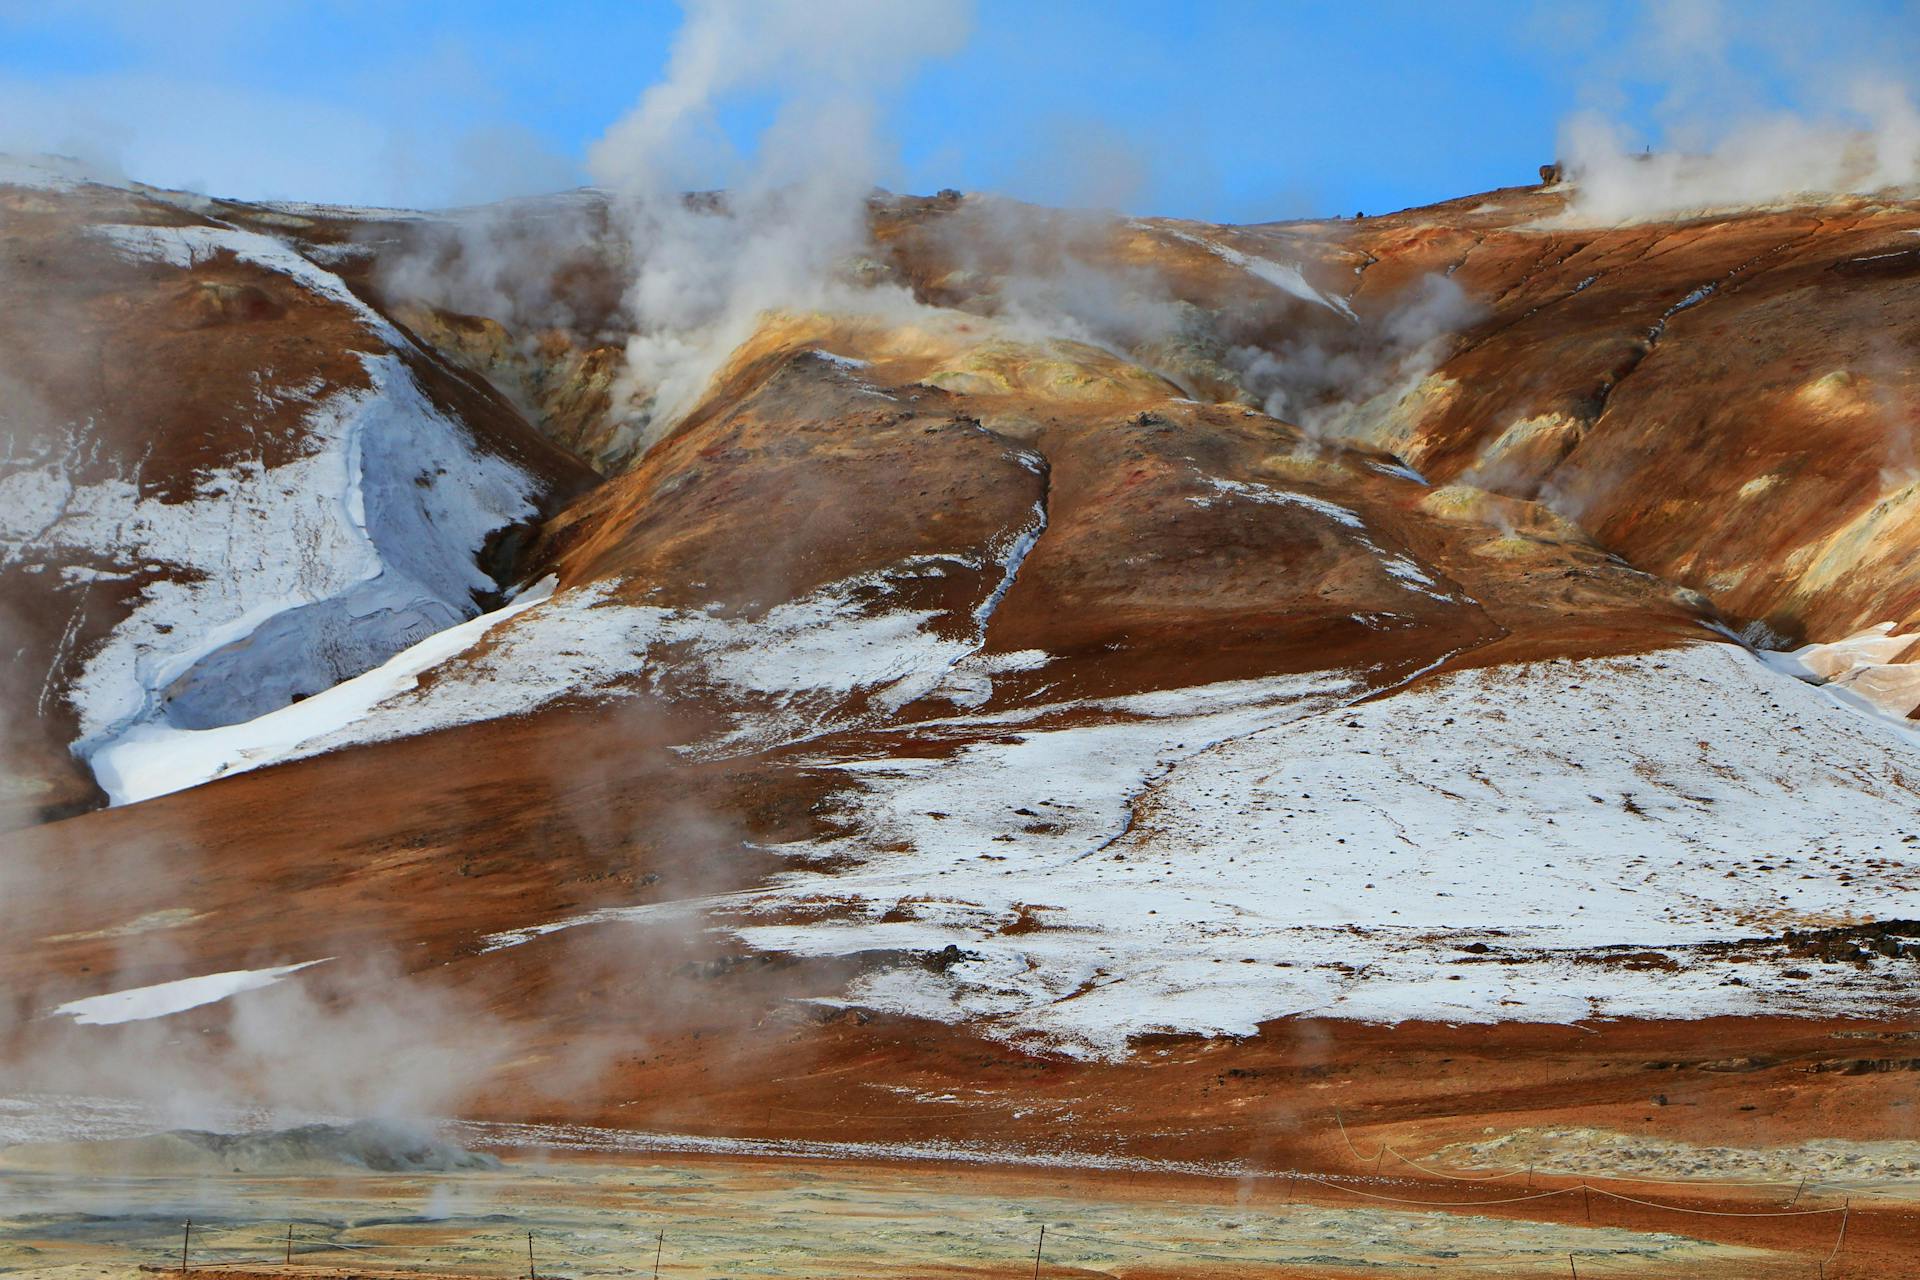 Geothermal area in Mývatn, characterised by columns of steam and reddish surface. 